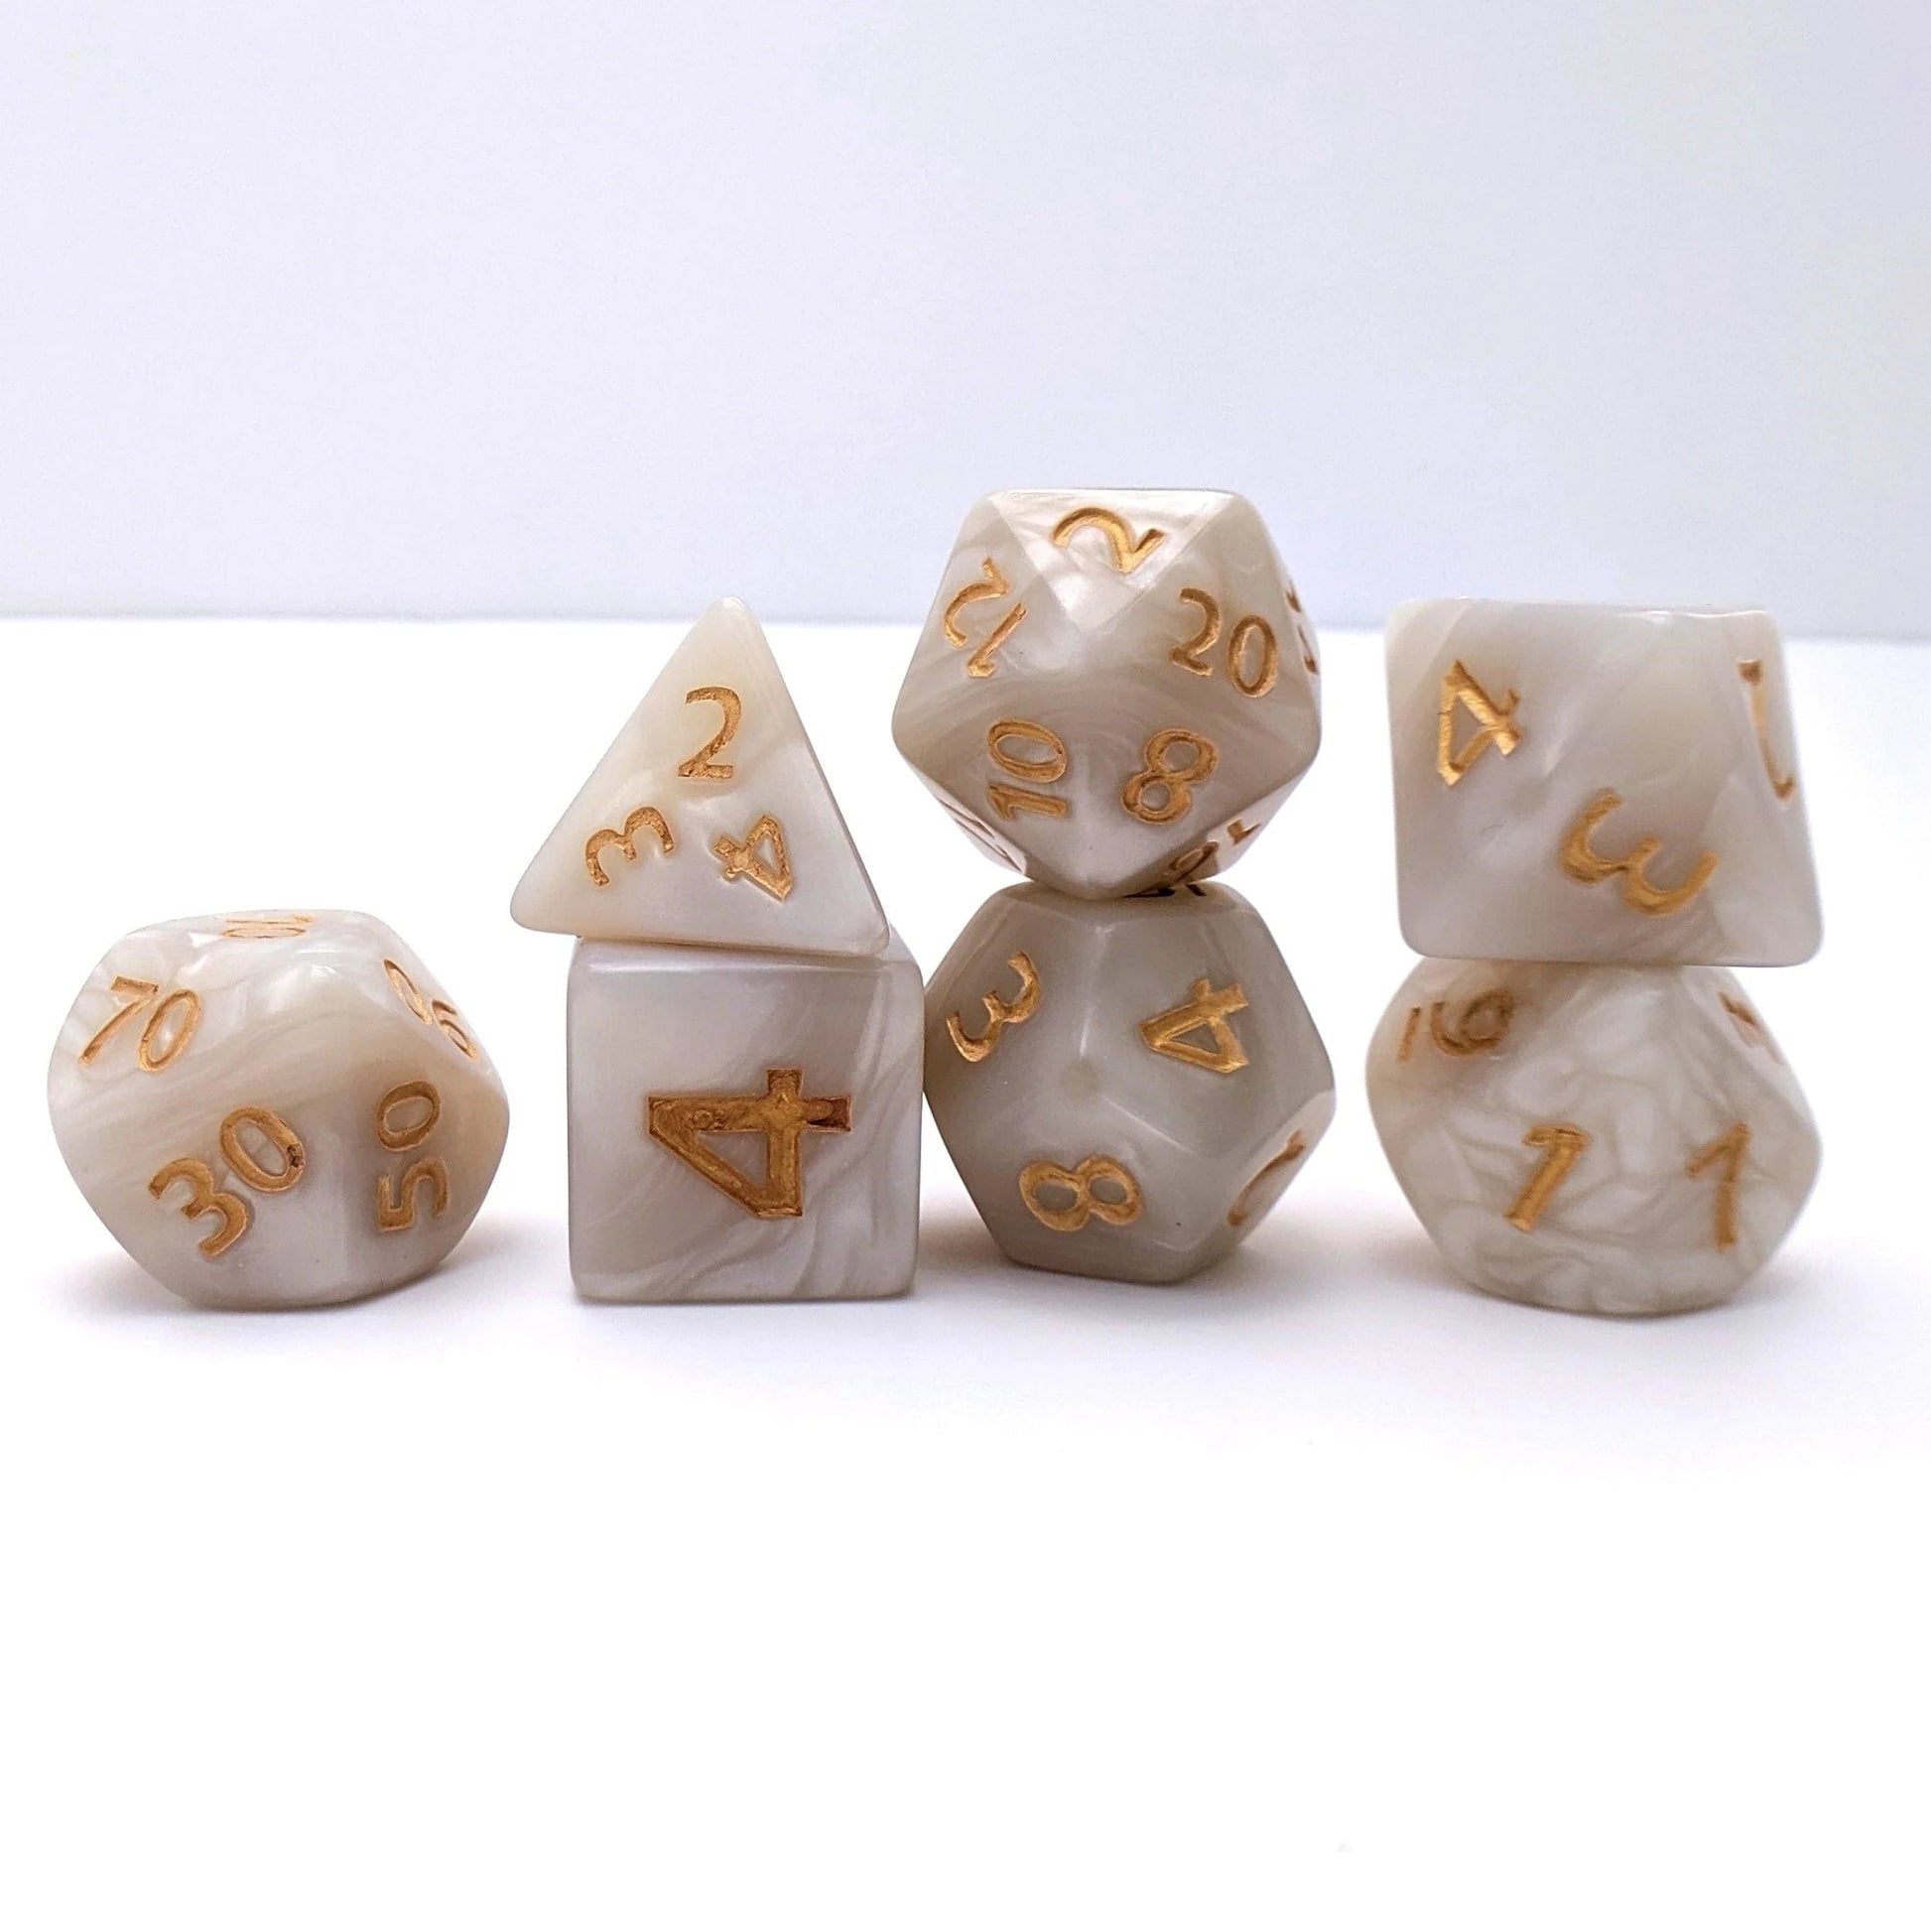 Gaint Pearly Gates Dice Set - 7 Piece Set - The Fourth Place